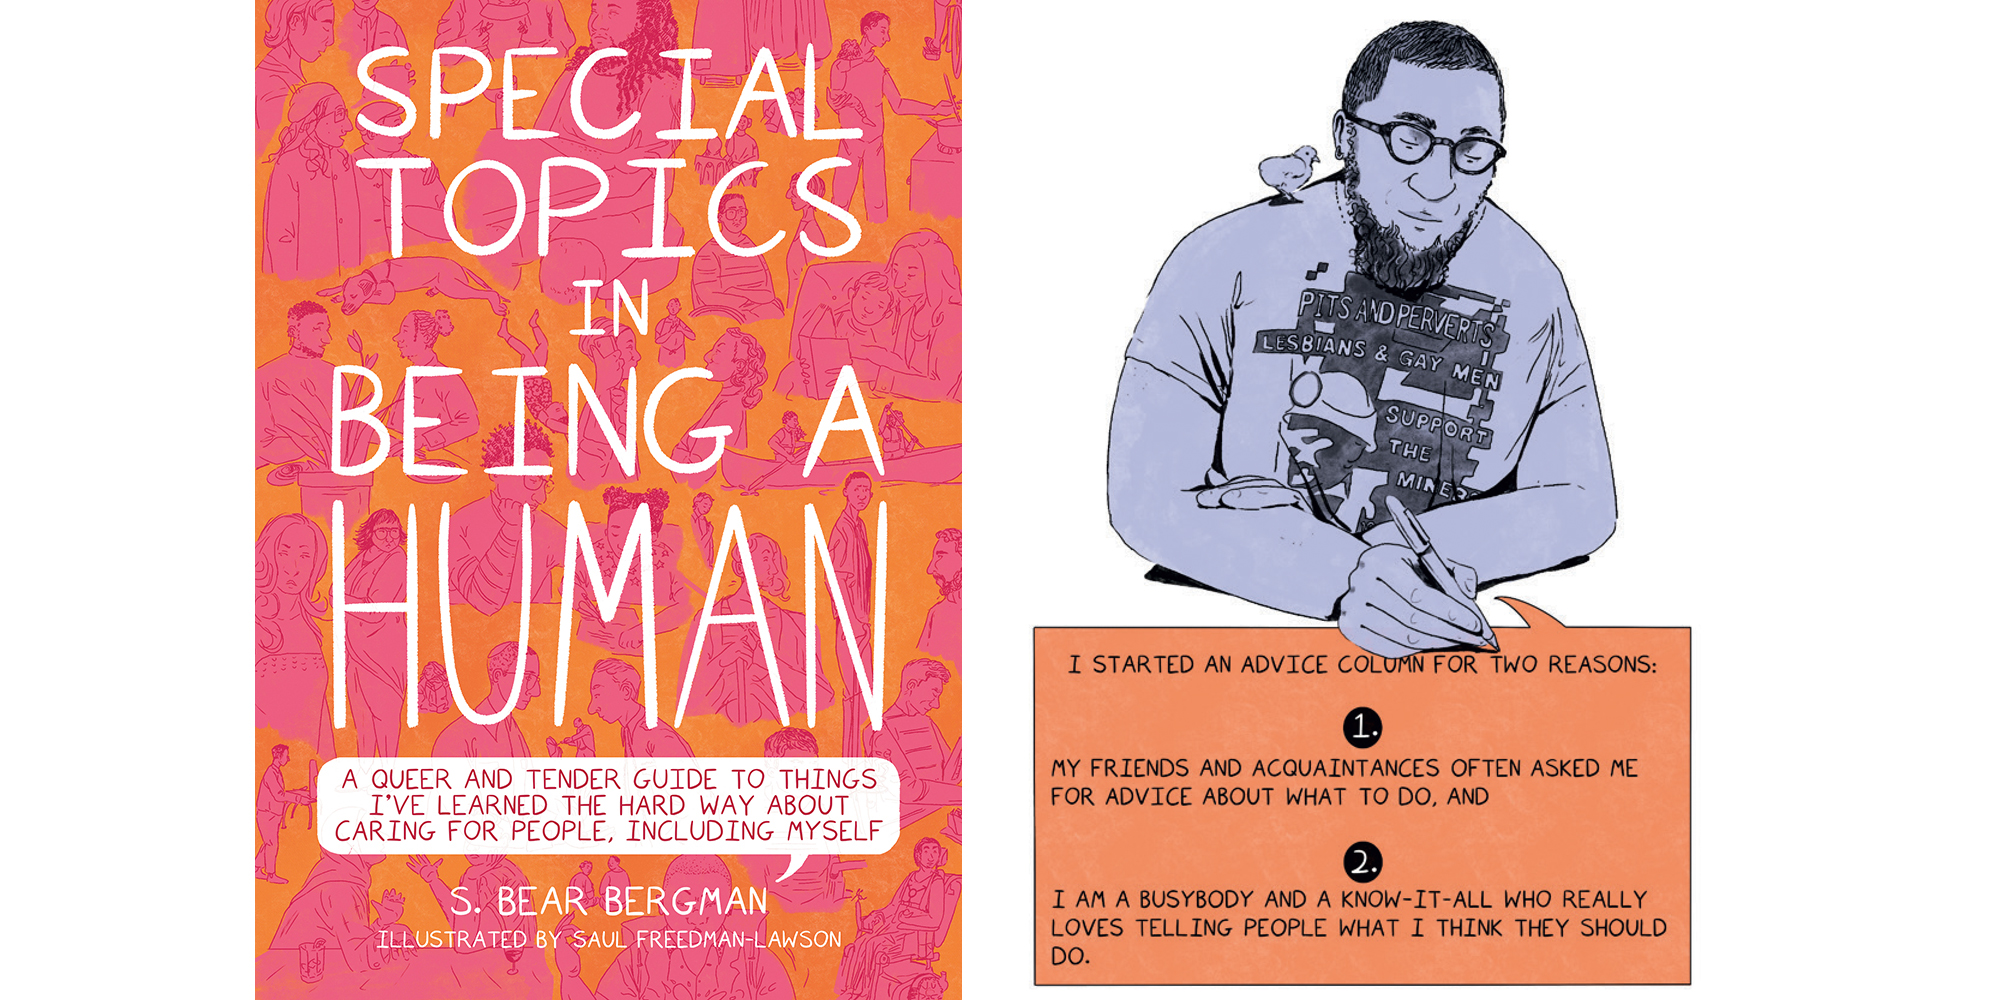 The cover of Special Topics in Being a Human by S. Bear Bergman and illustrator Saul Freedman-Lawson with an illustration of the author